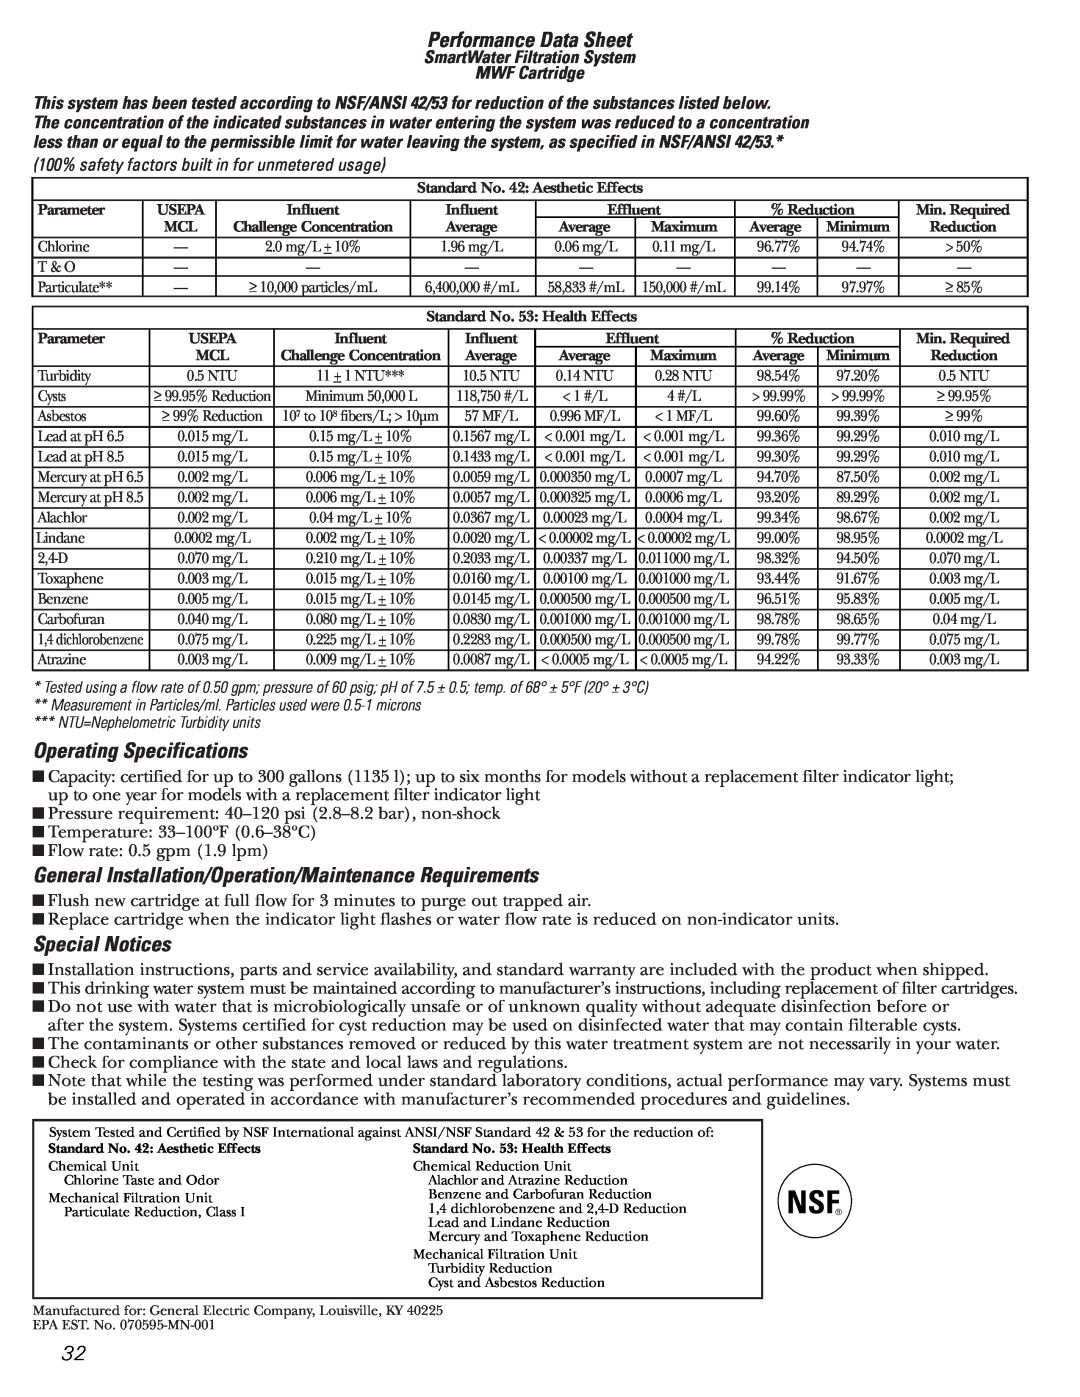 GE 25 and 27 installation instructions Performance Data Sheet, Operating Specifications, Special Notices 